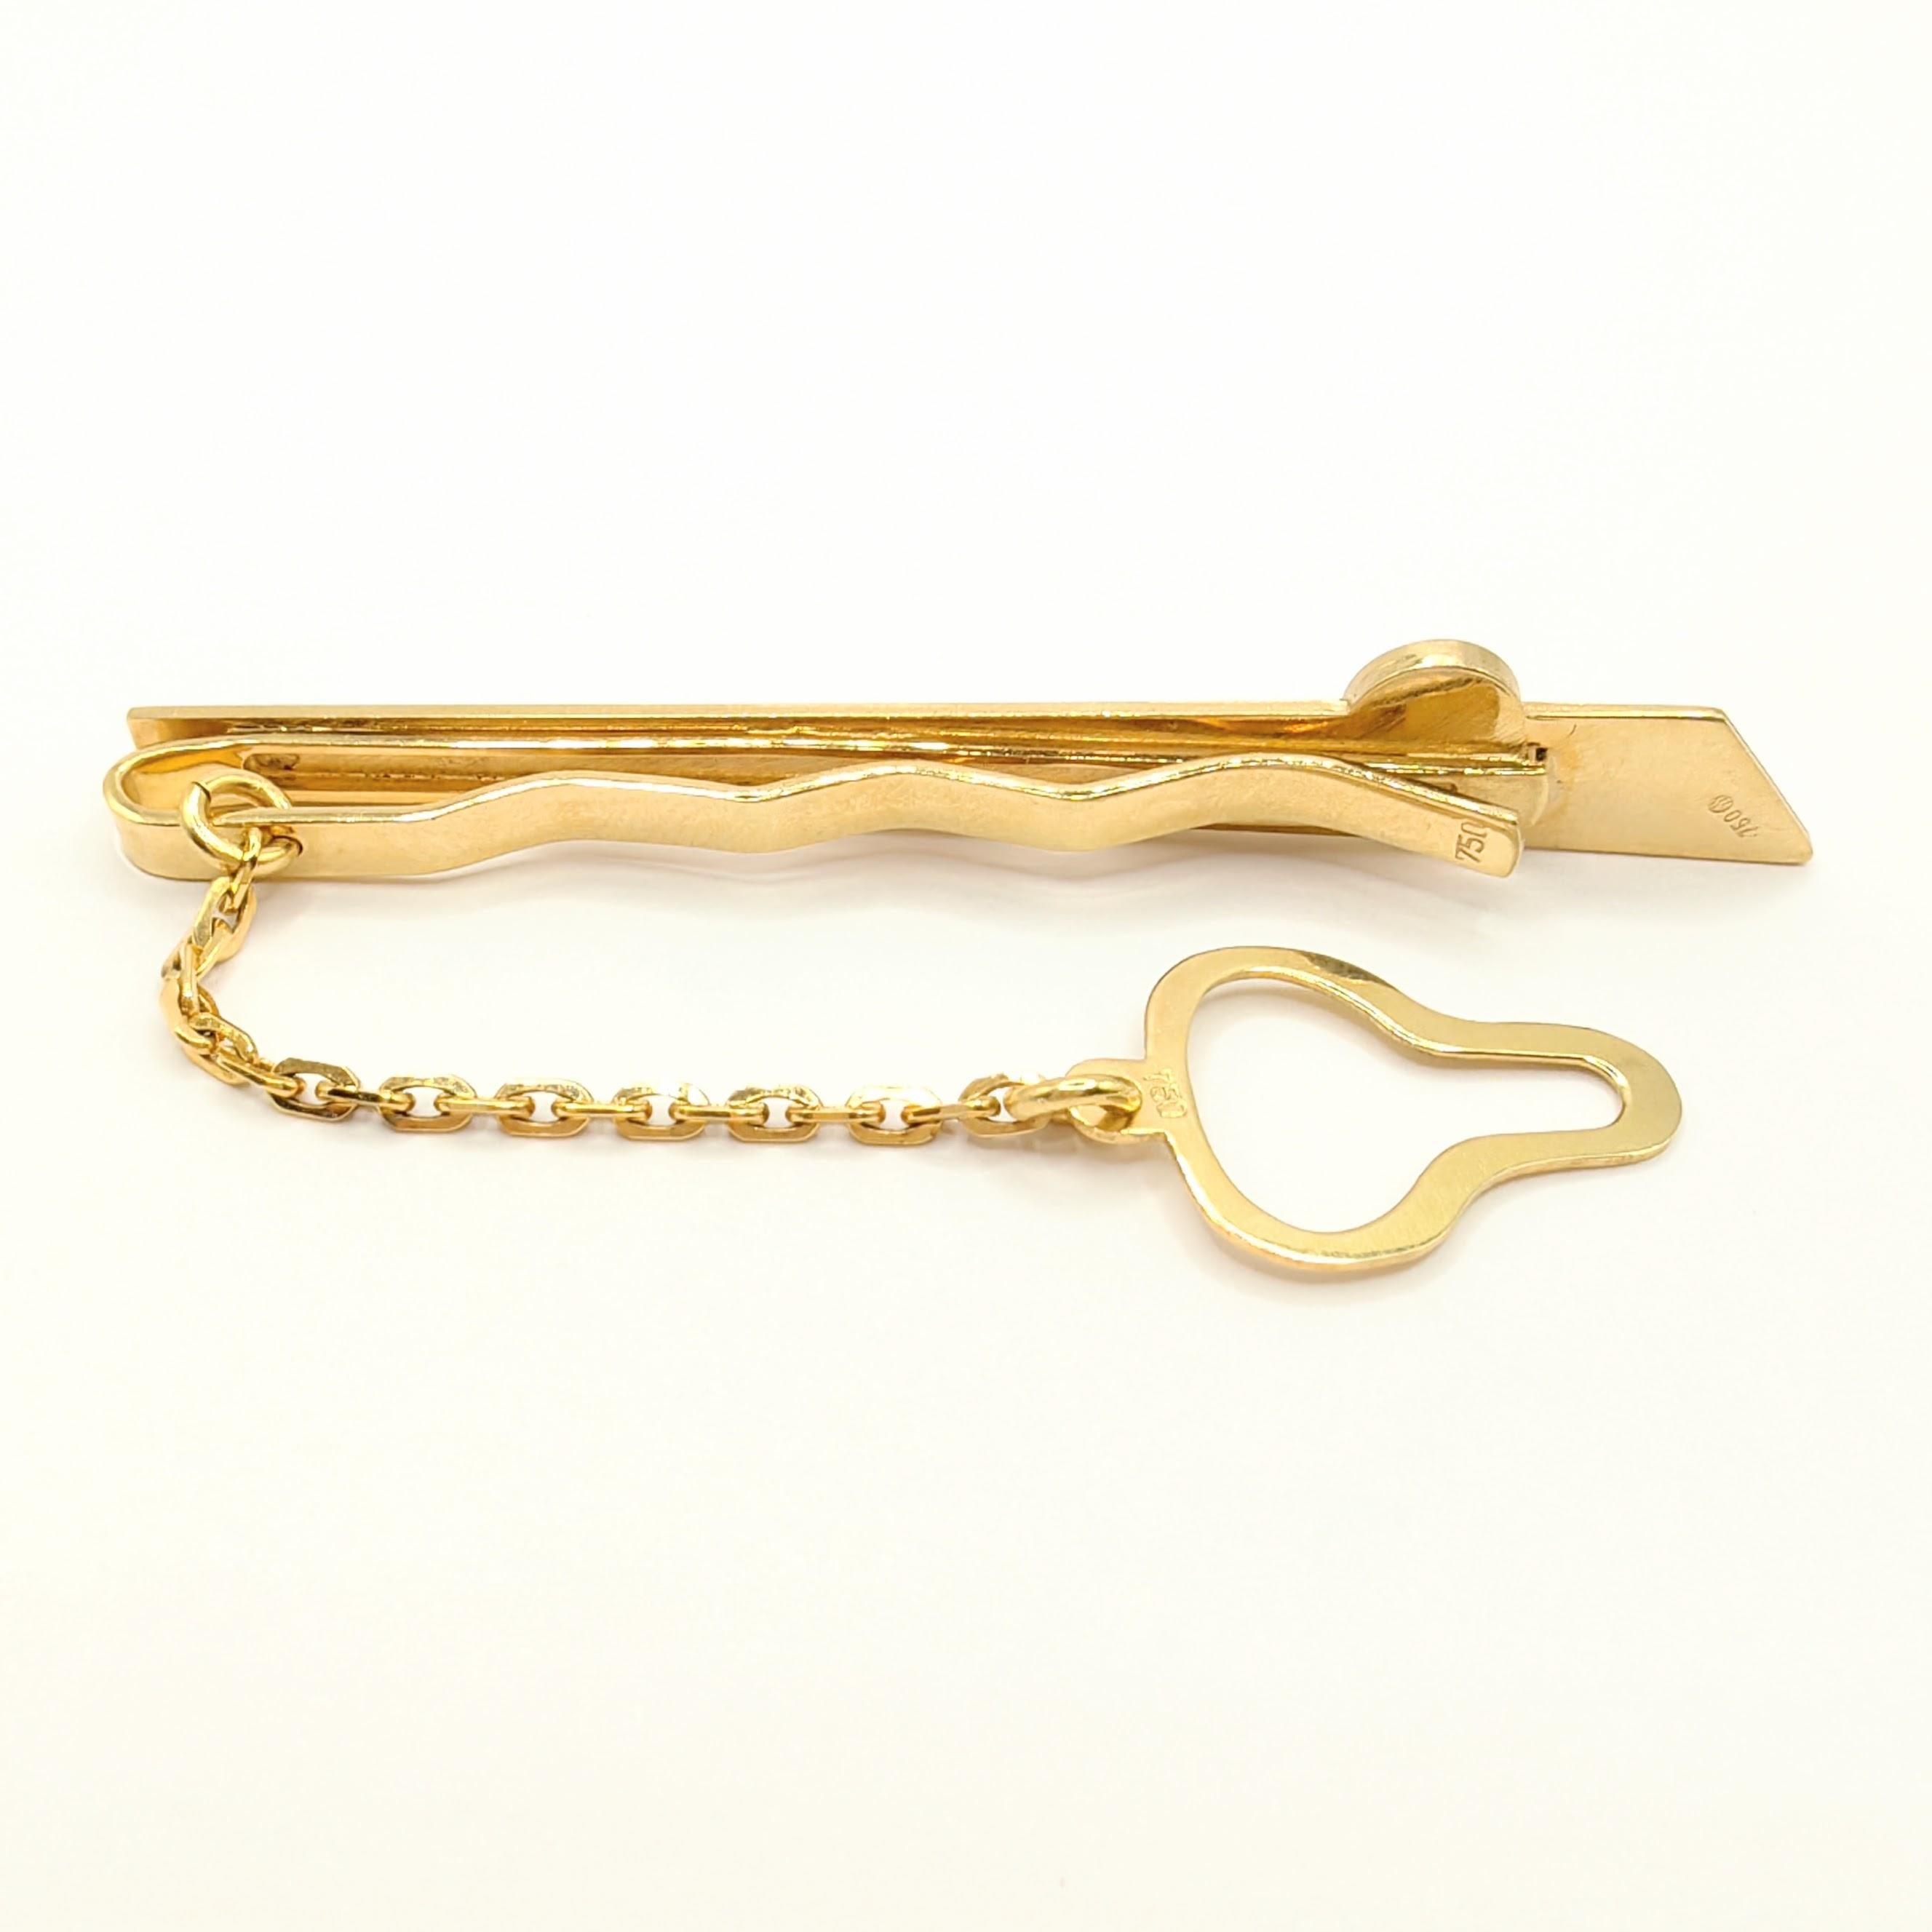 Vintage Geometric Design Tie Clip With Chain in 18K Yellow & White Two-tone Gold In New Condition For Sale In Wan Chai District, HK